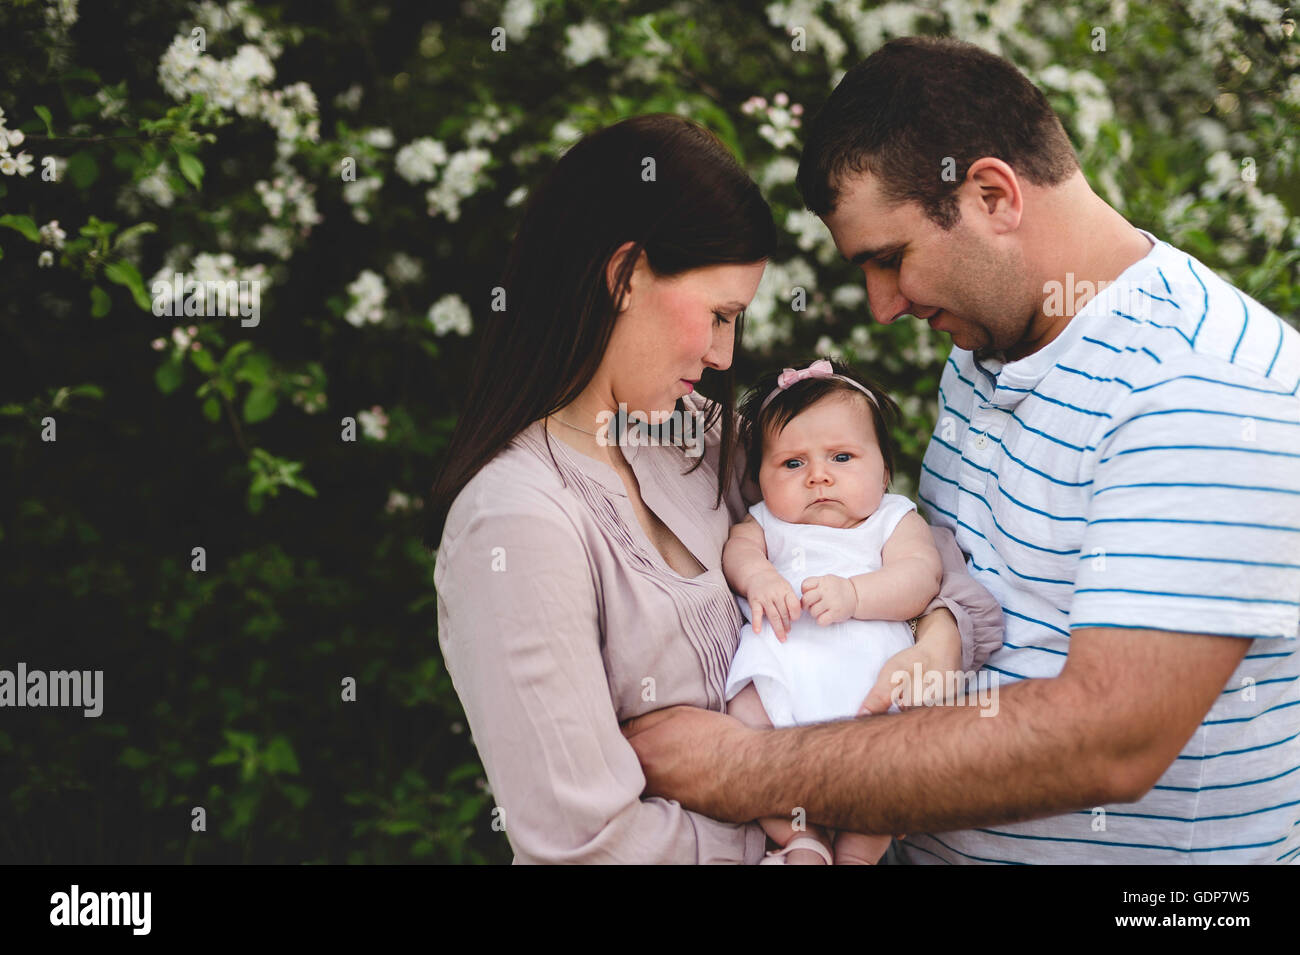 Portrait of baby girl carried between mother and father by garden apple blossom Stock Photo